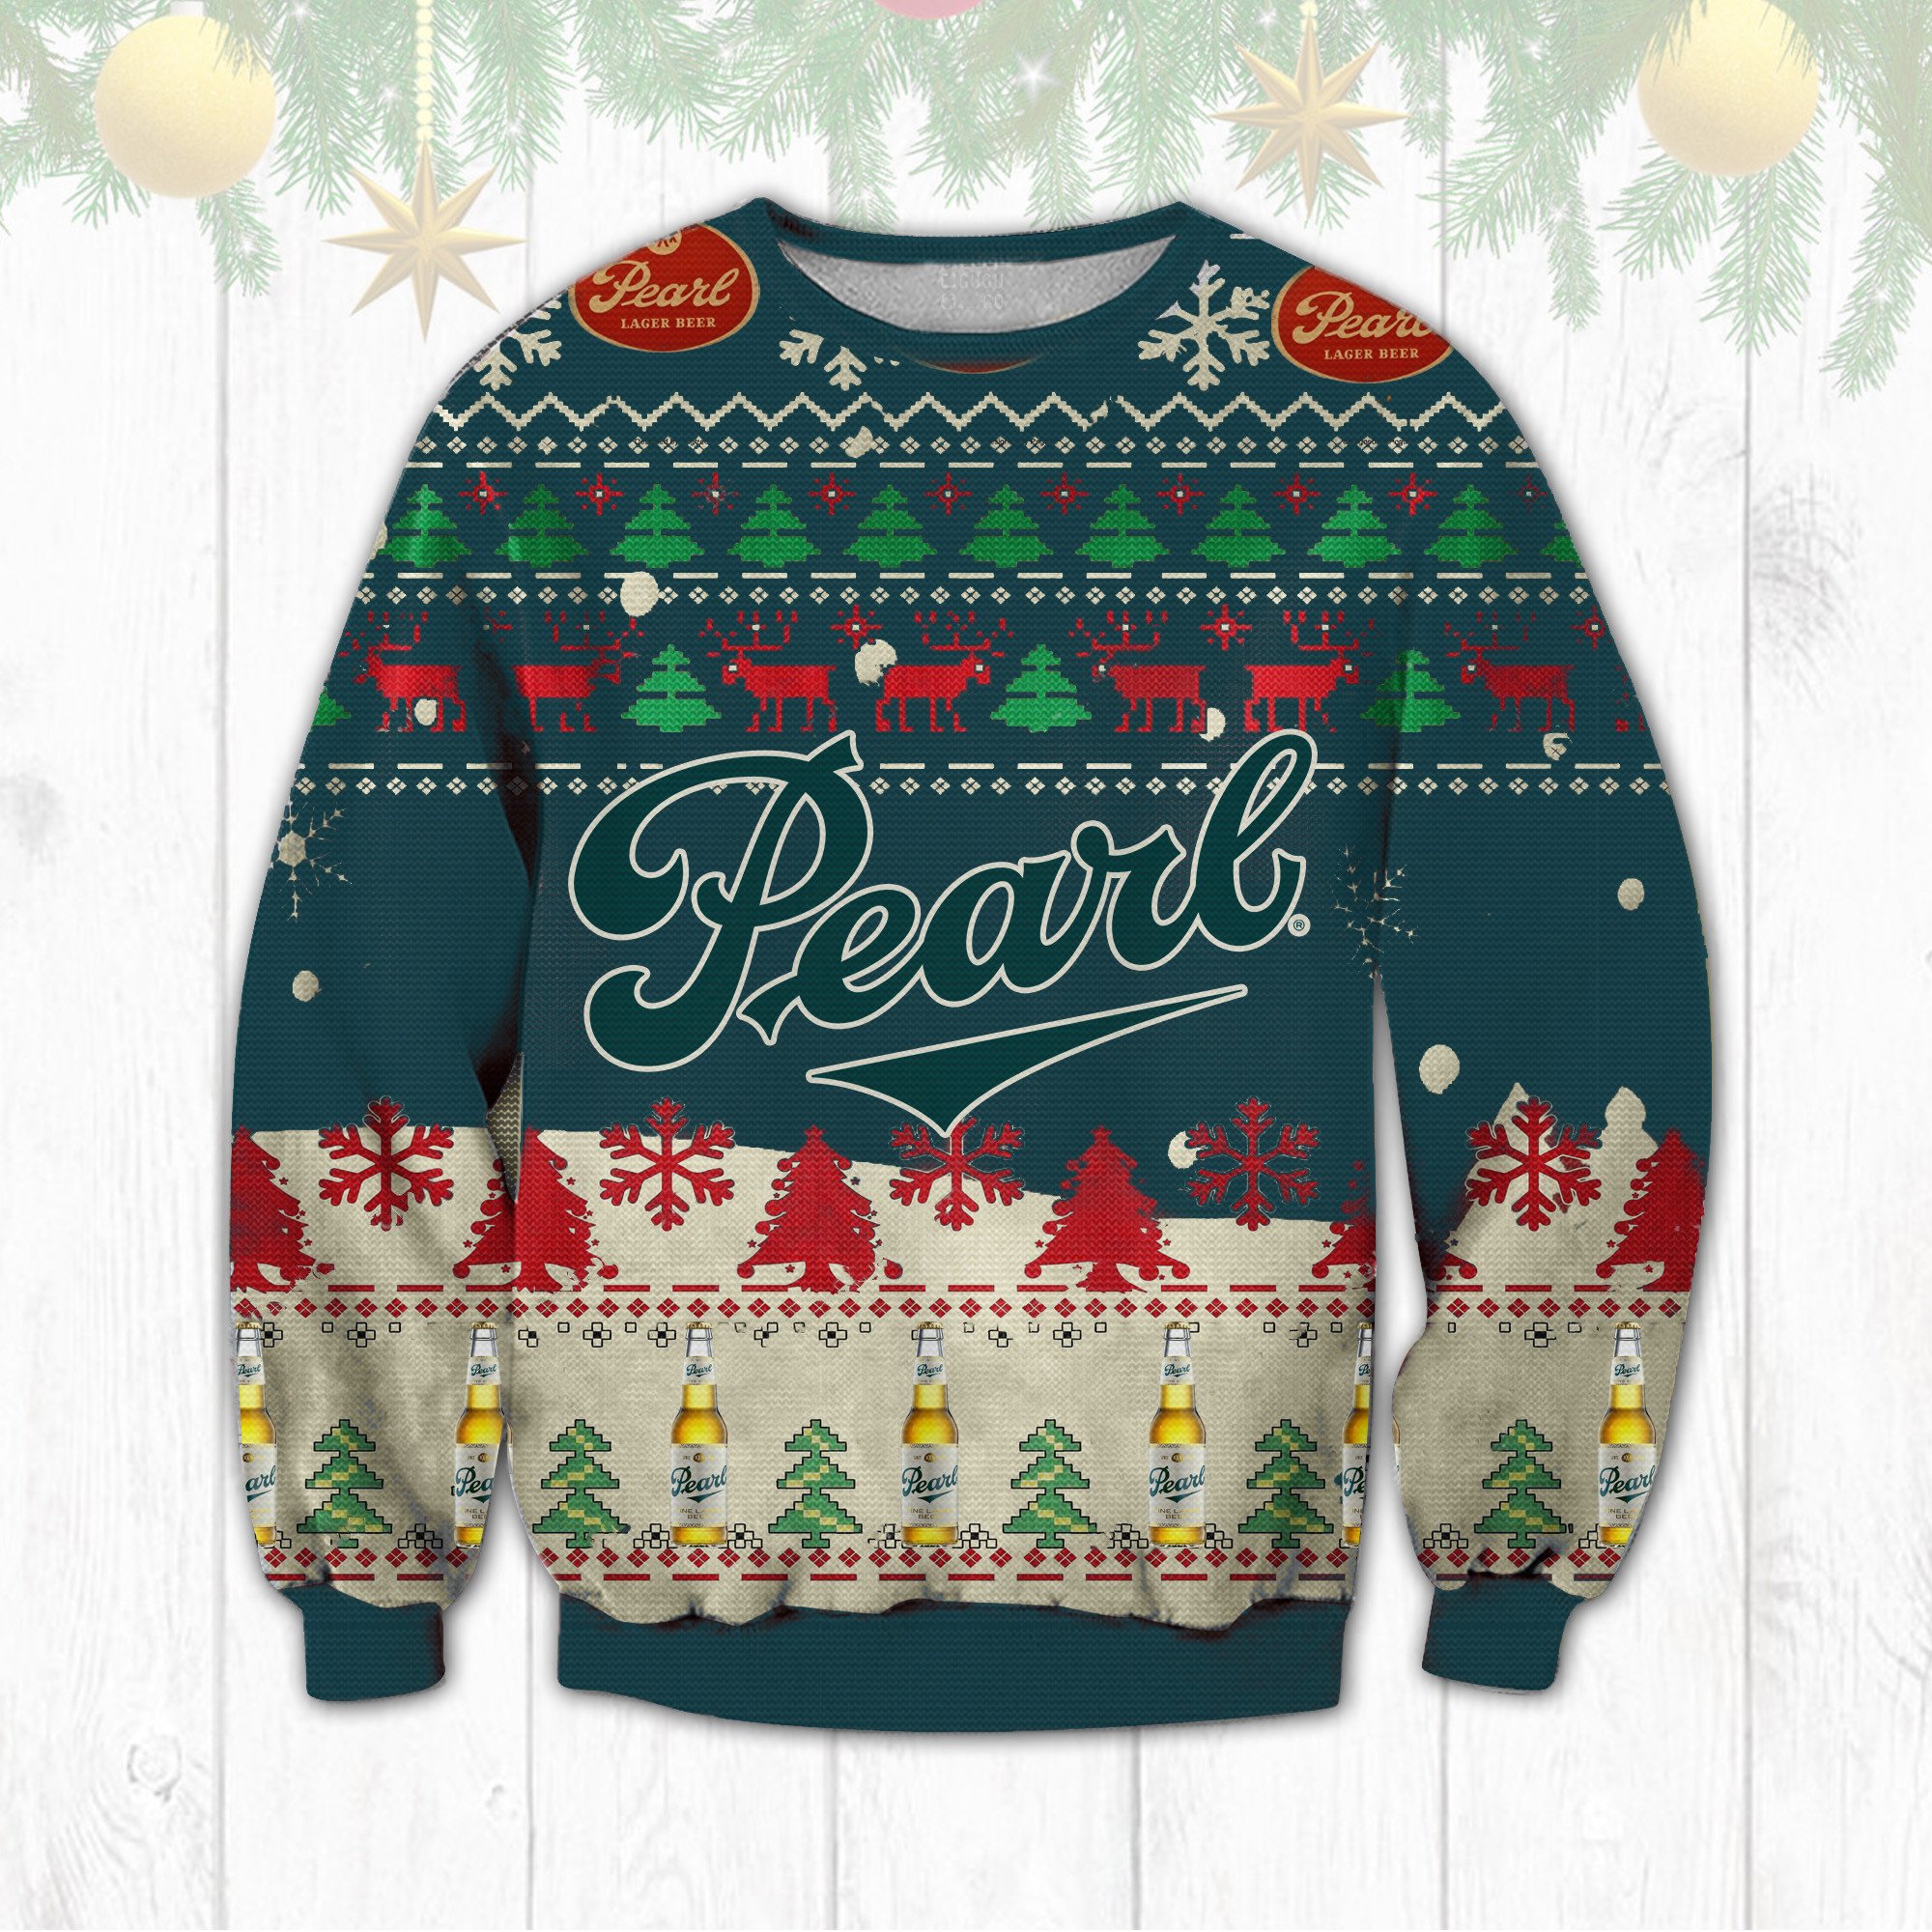 Pearl Beer Brewing Company Christmas sweater 1